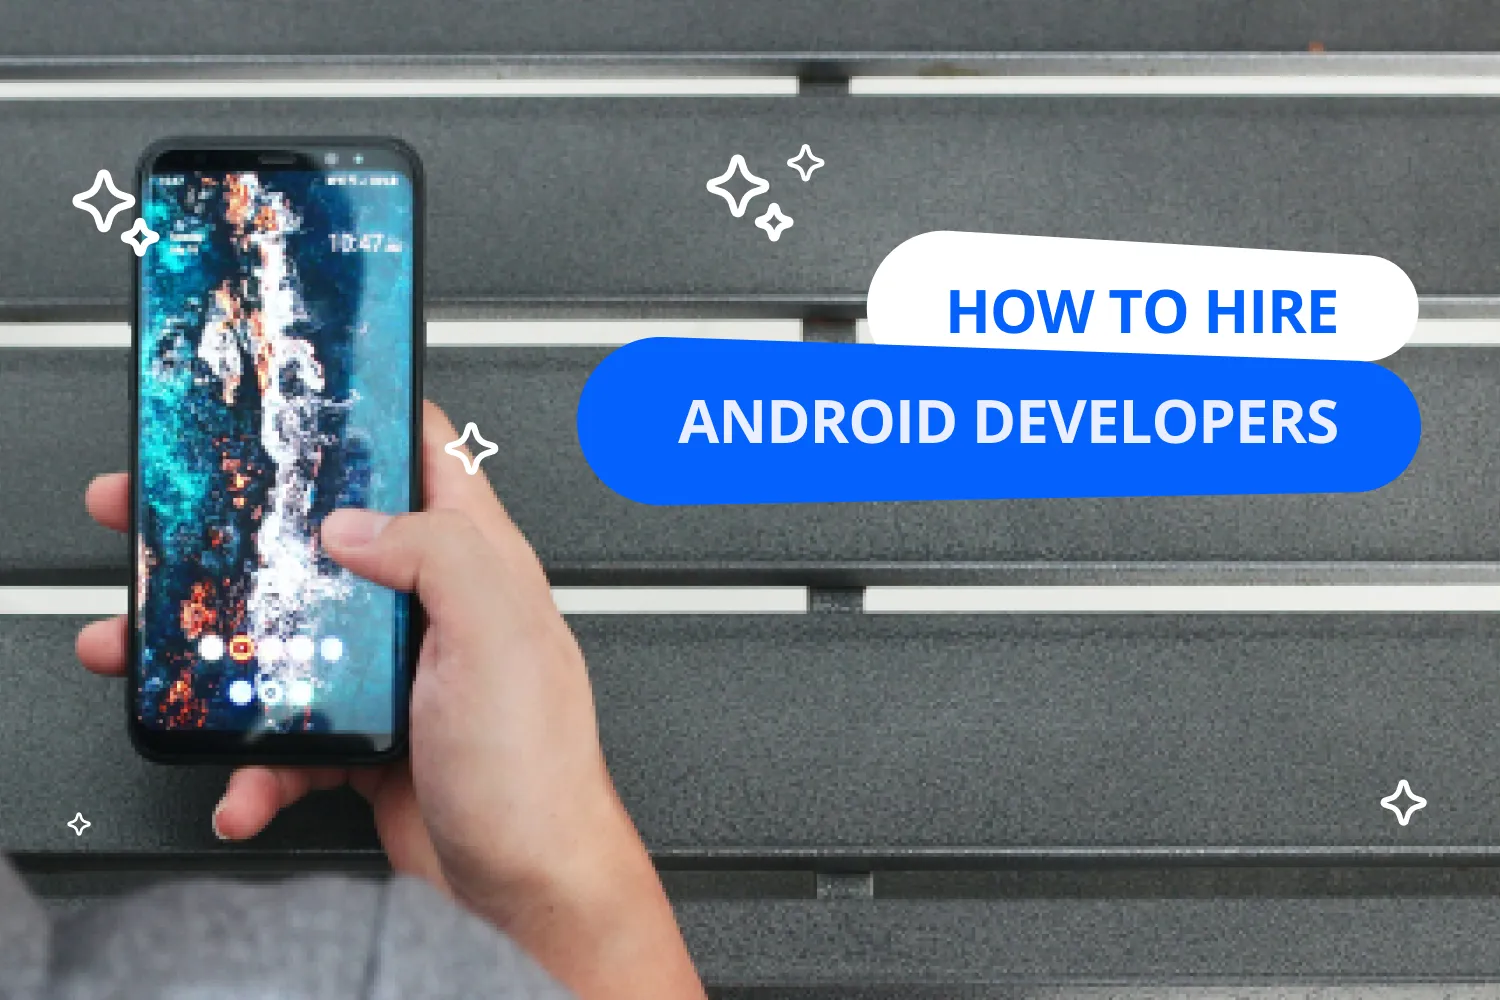 How to Hire Android Developers